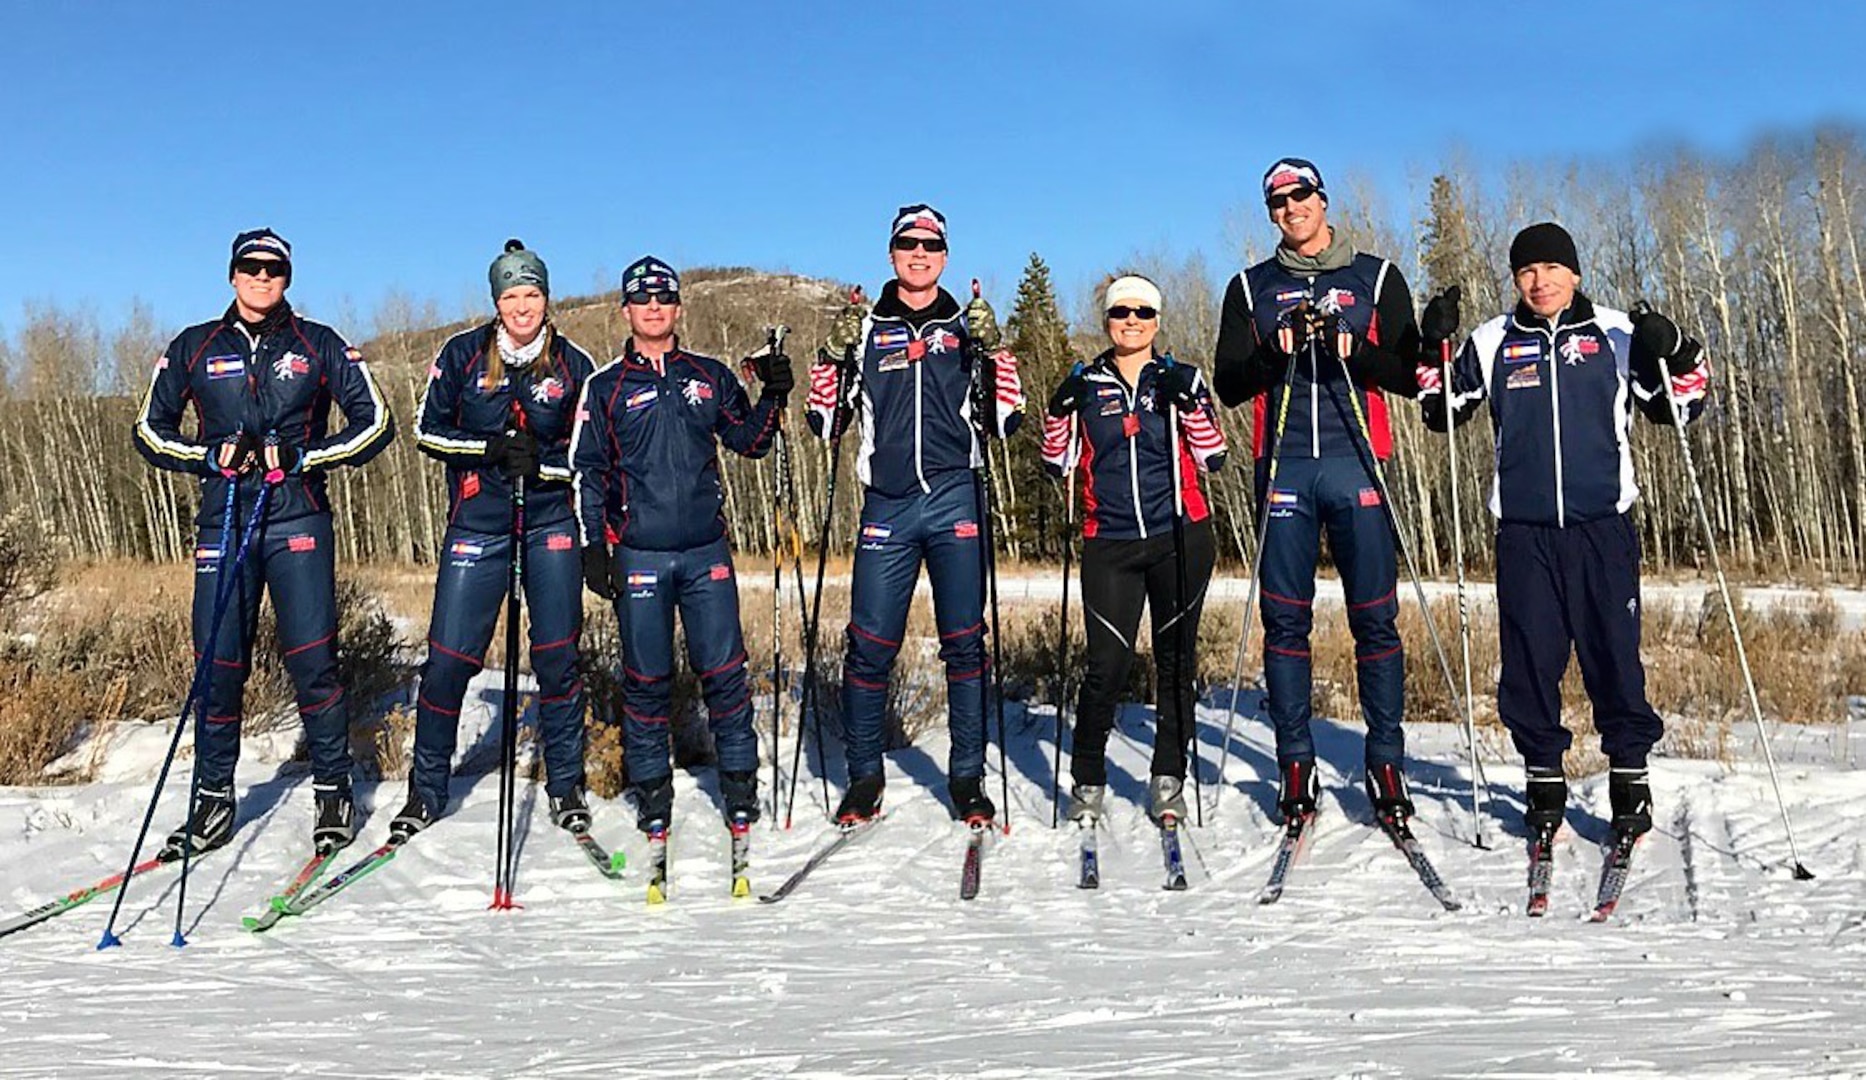 Members of the 2017 Colorado National Guard Biathlon team pose for a photo during ski training at Snow Mountain Ranch in Granby, Colorado, Dec. 15, 2017.